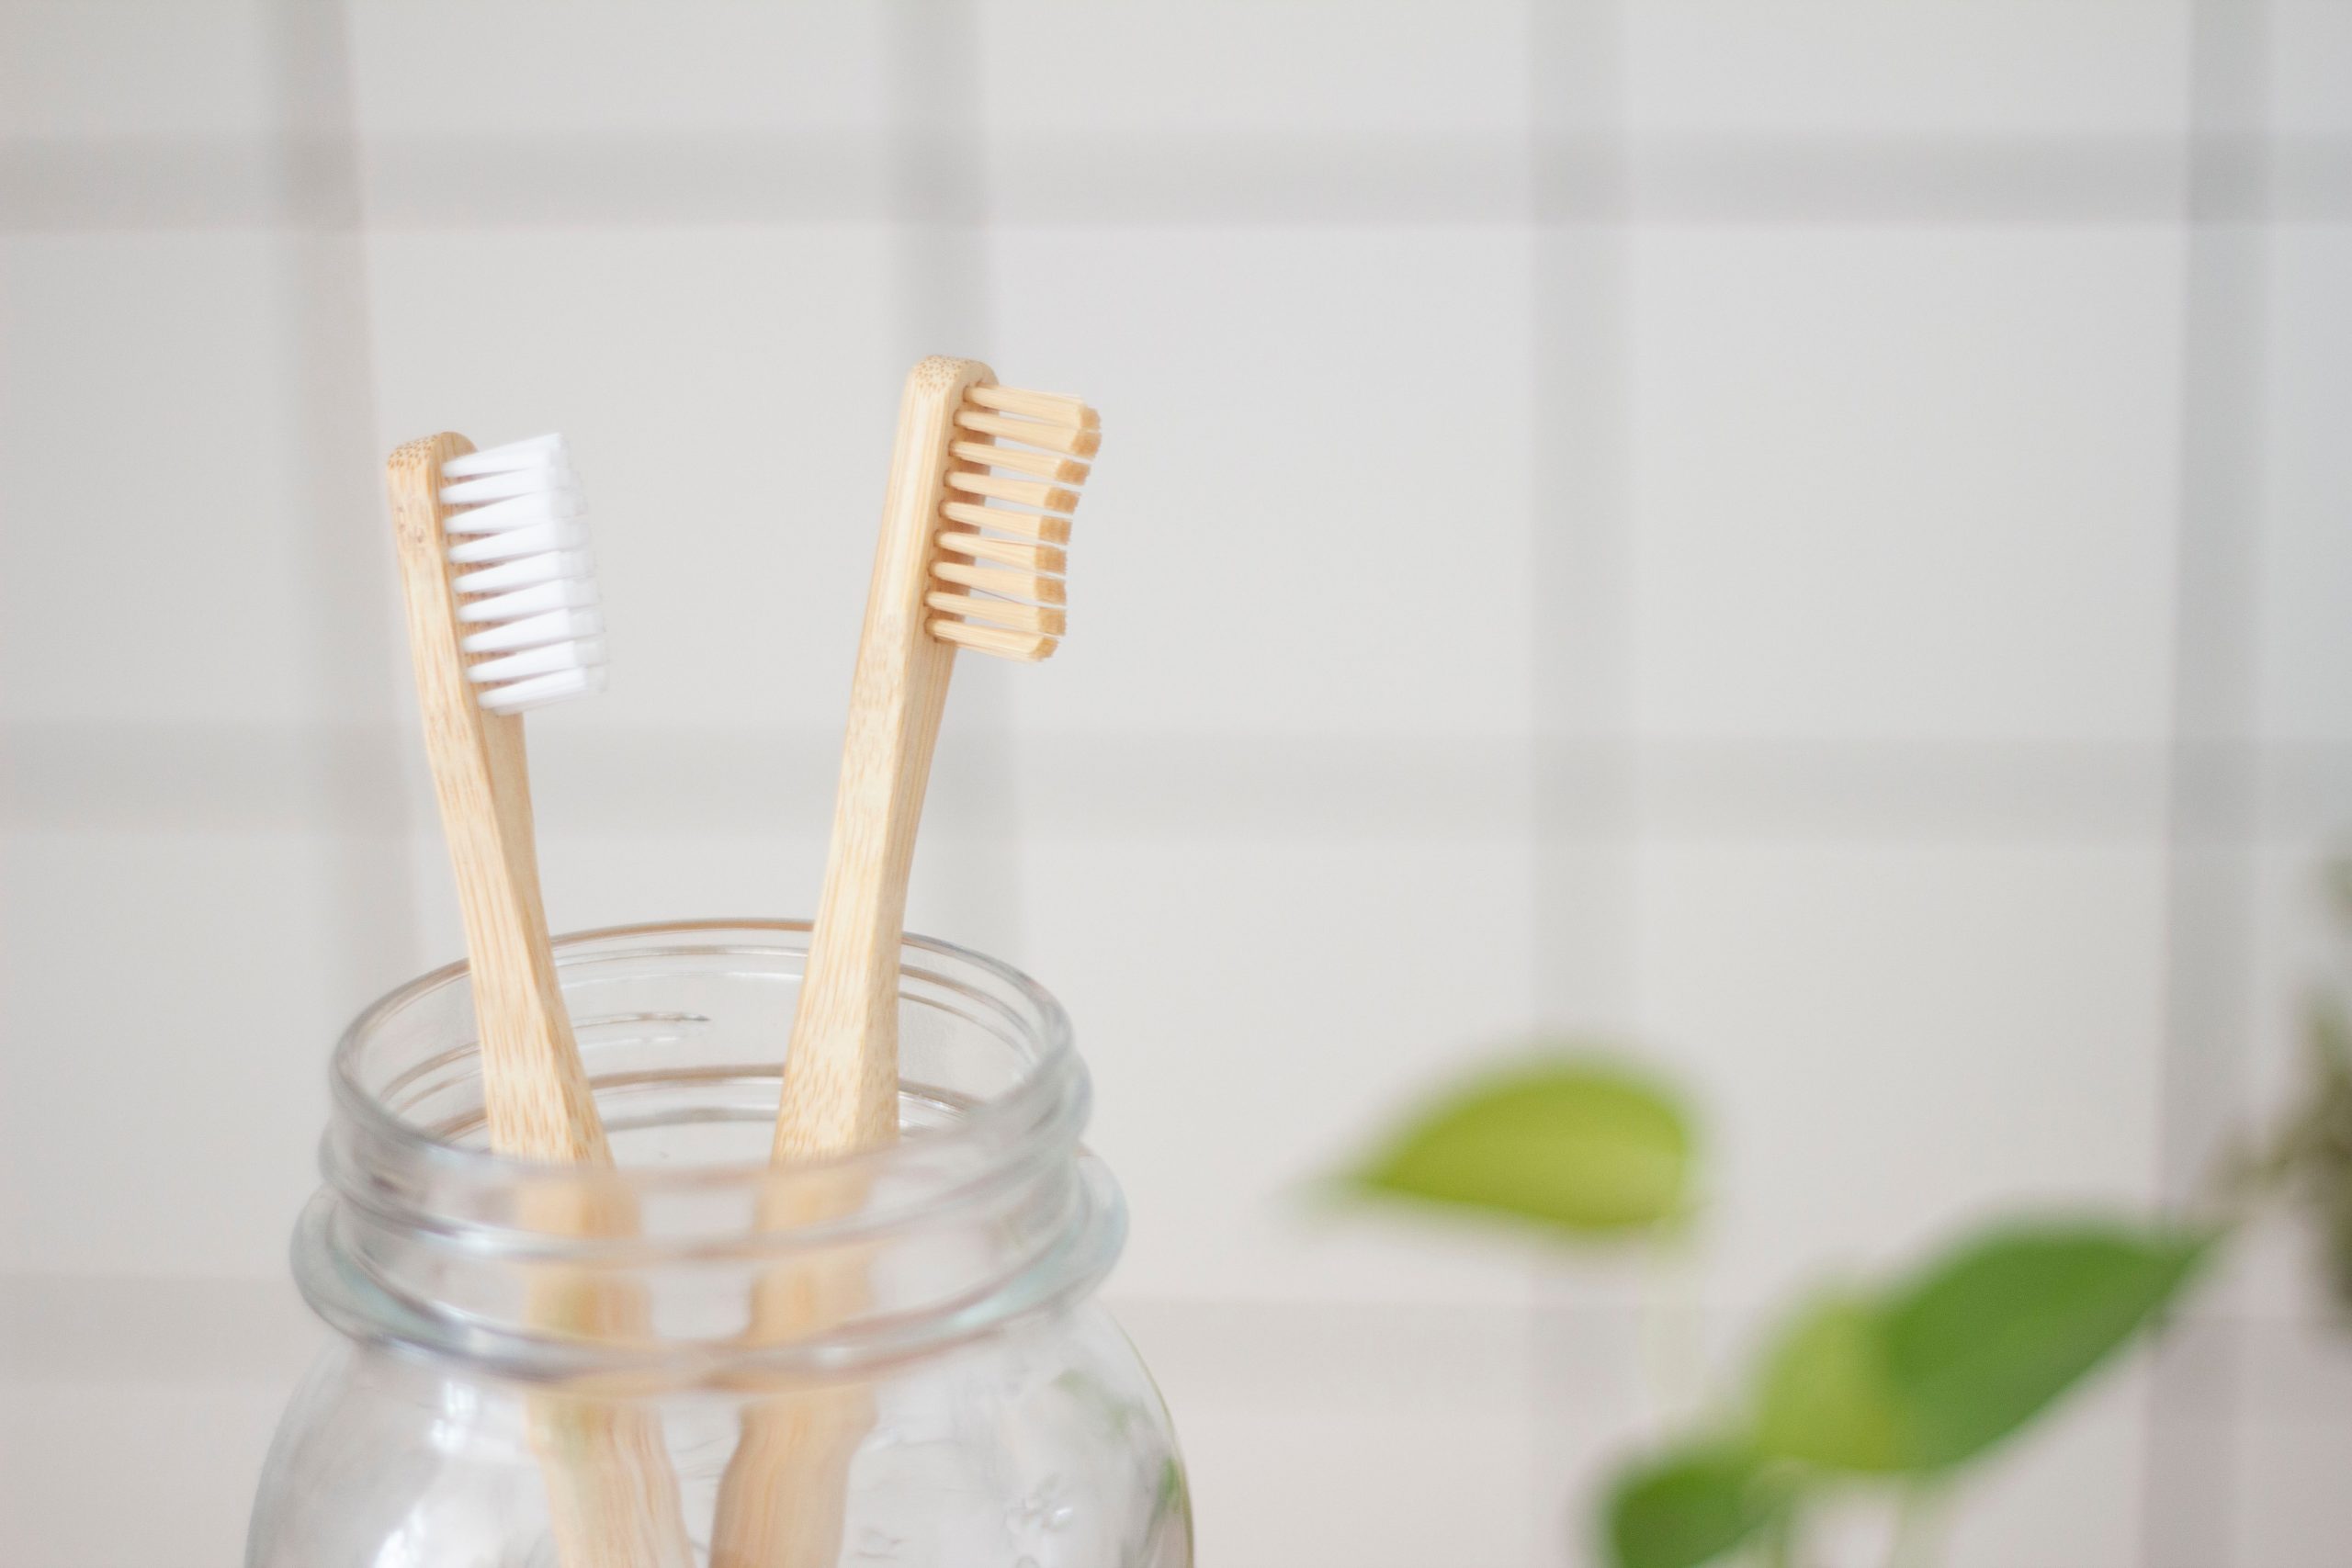 in an article about oral health, two toothbrushes in a jar